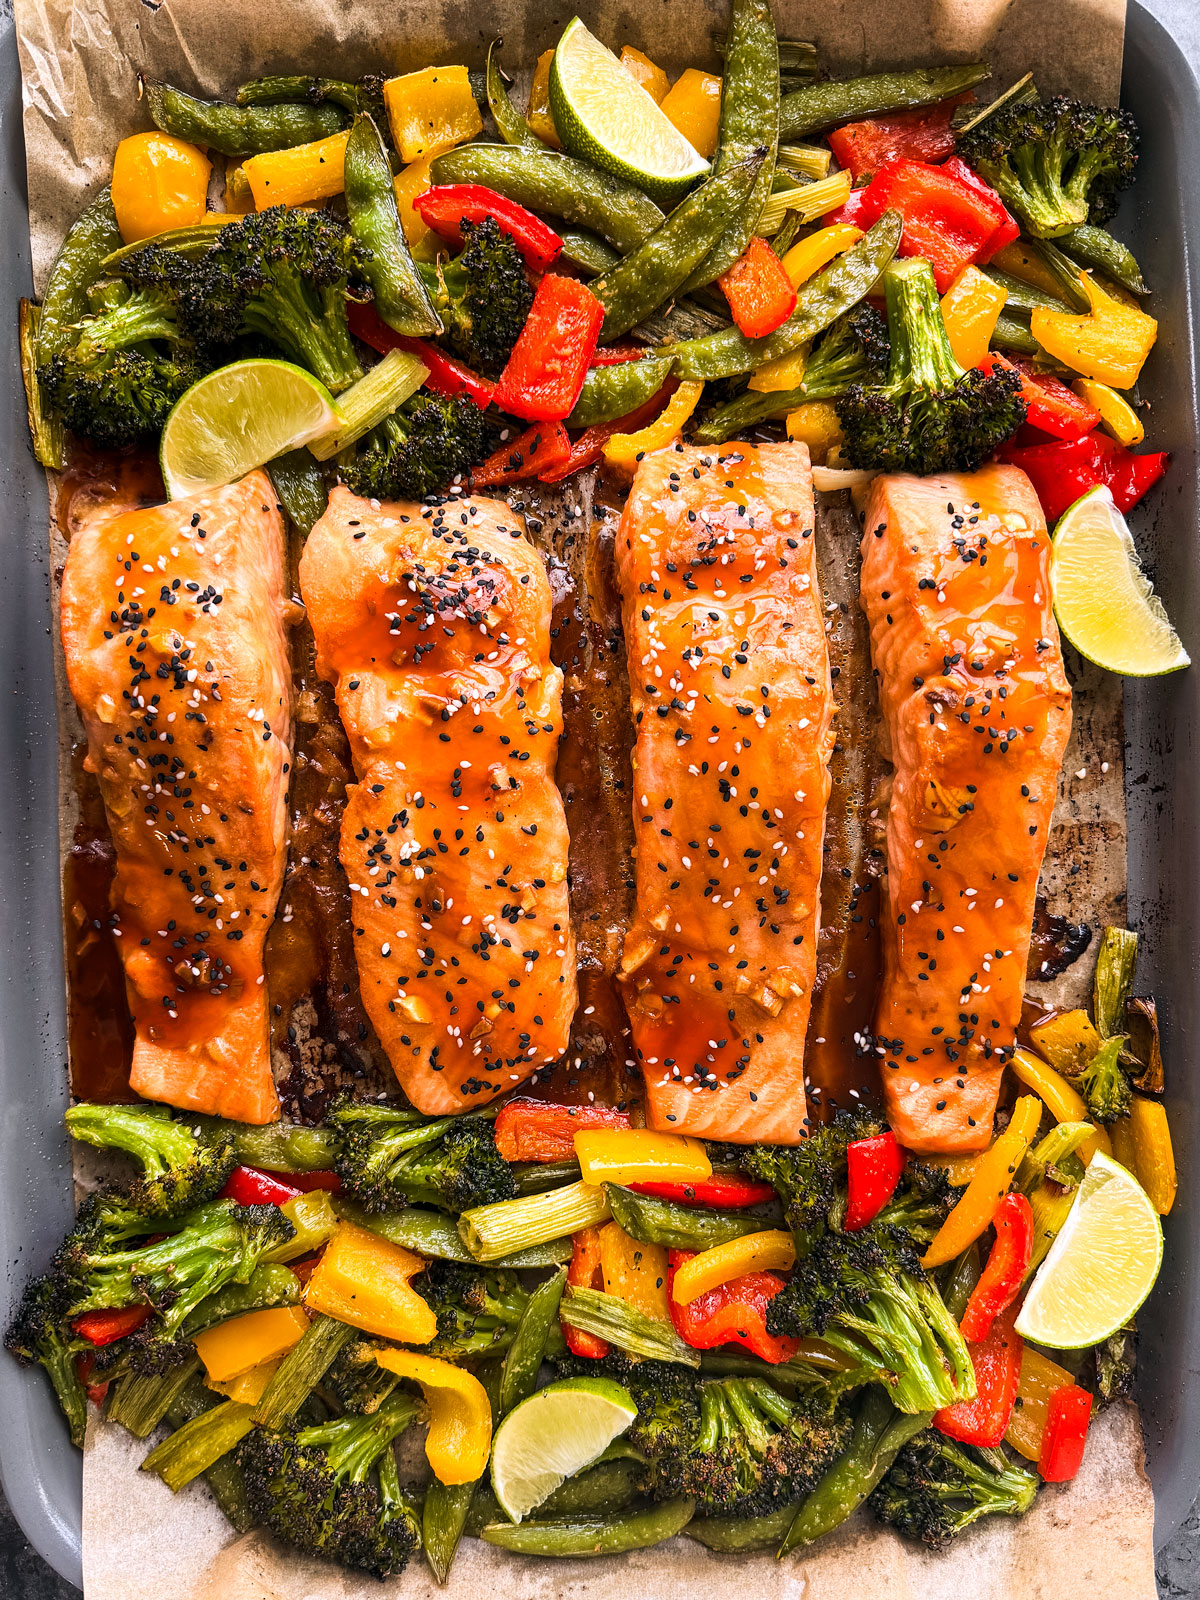 Cooked salmon fillets on a sheet pan with roasted vegetables.